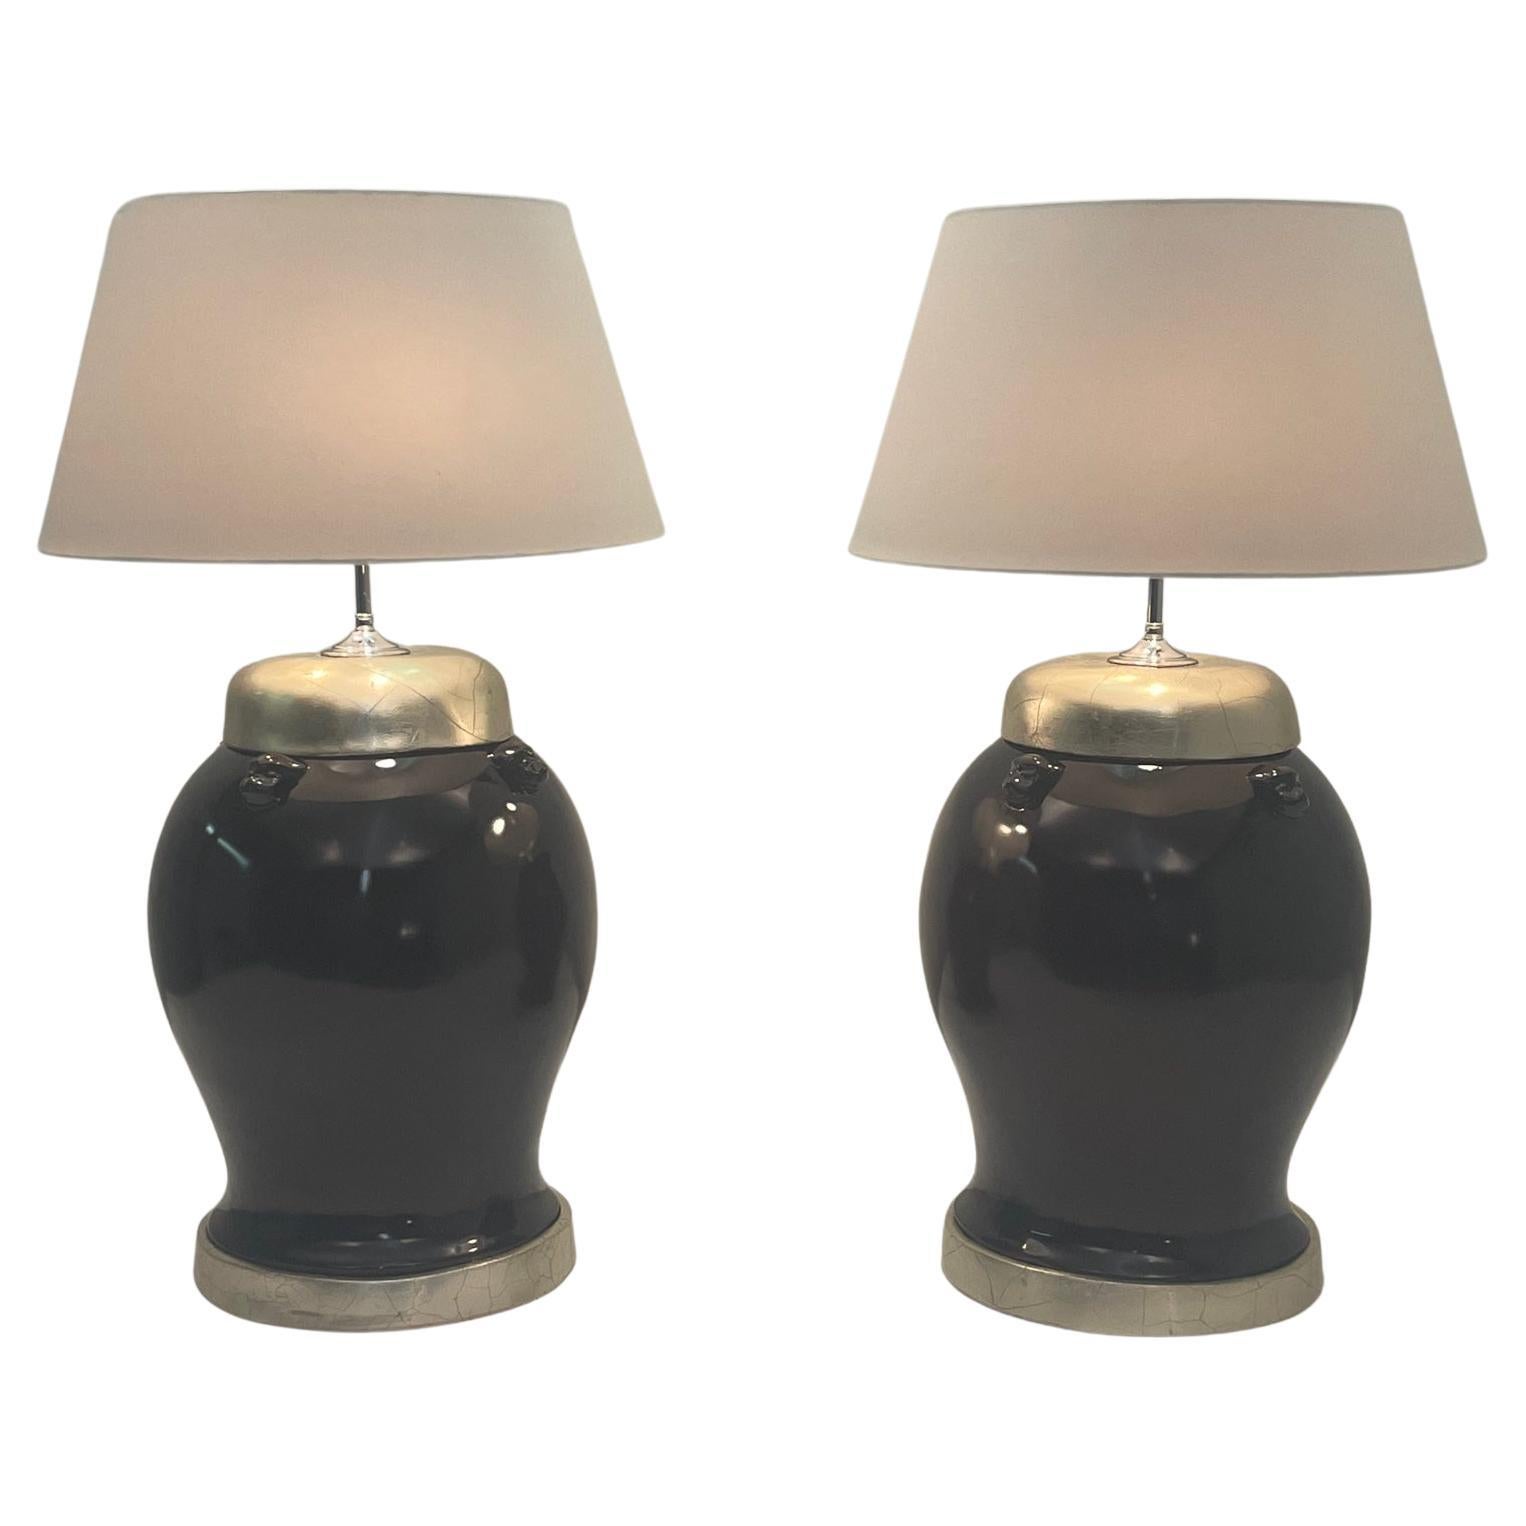 Impressive Pair of Rich Burgundy Laquer & Silver Leaf Ginger Jar Table Lamps